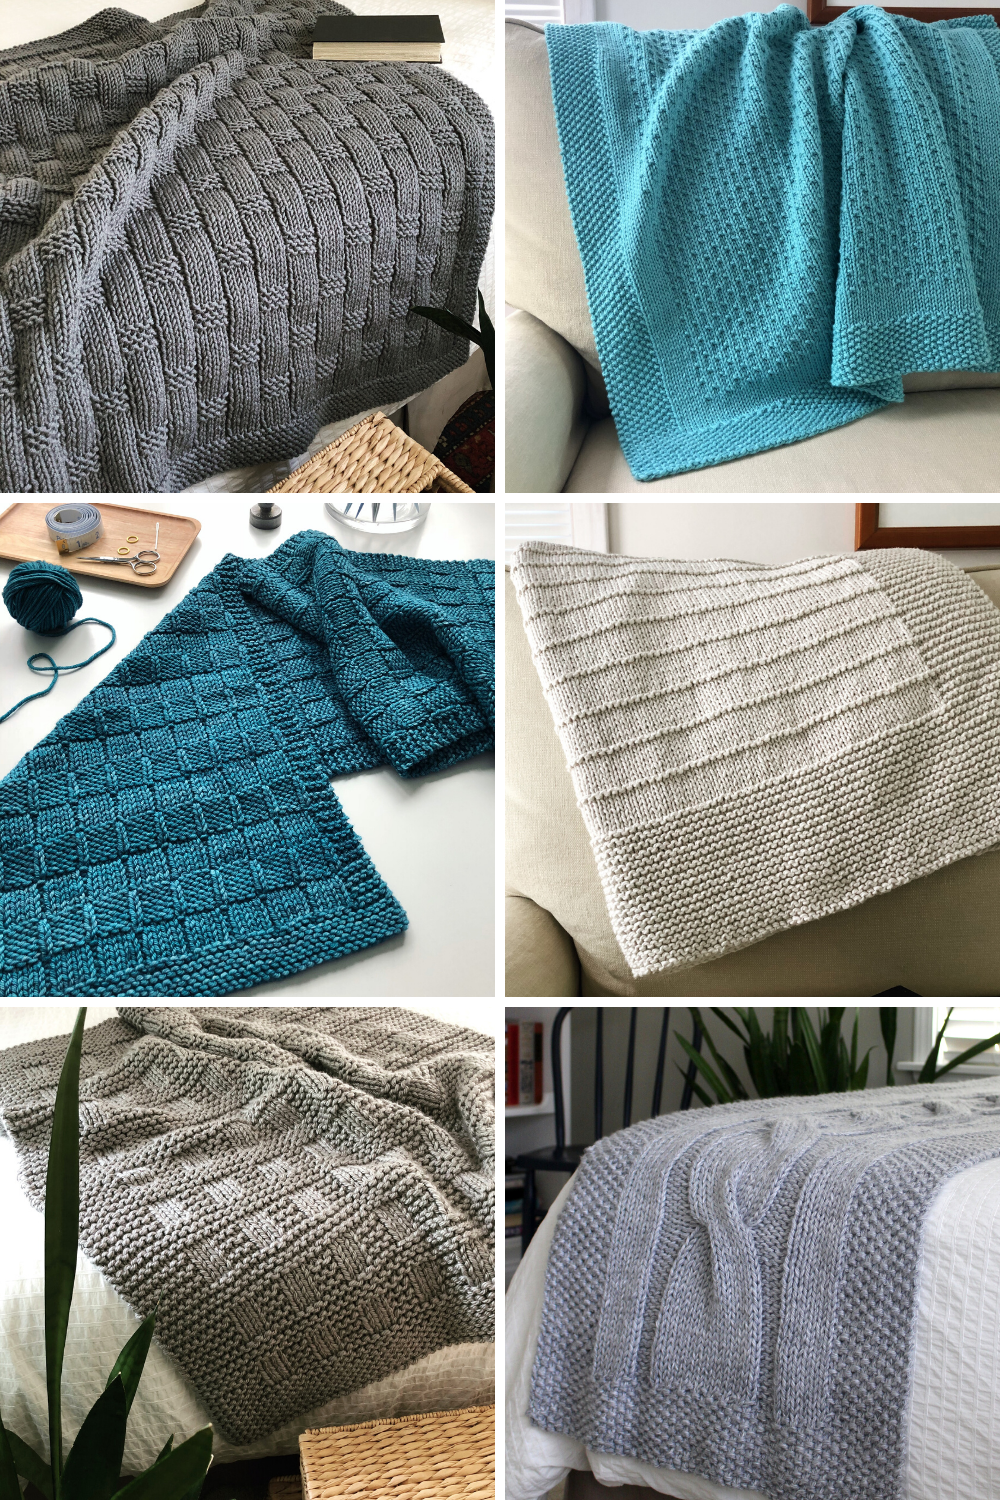 https://images.squarespace-cdn.com/content/v1/5ddee0943d393a7e06173756/1582648569780-GBNXZRSPH1ZCTURUCPDS/Six+Favorite+Knitting+Patterns+FEB+2020.png